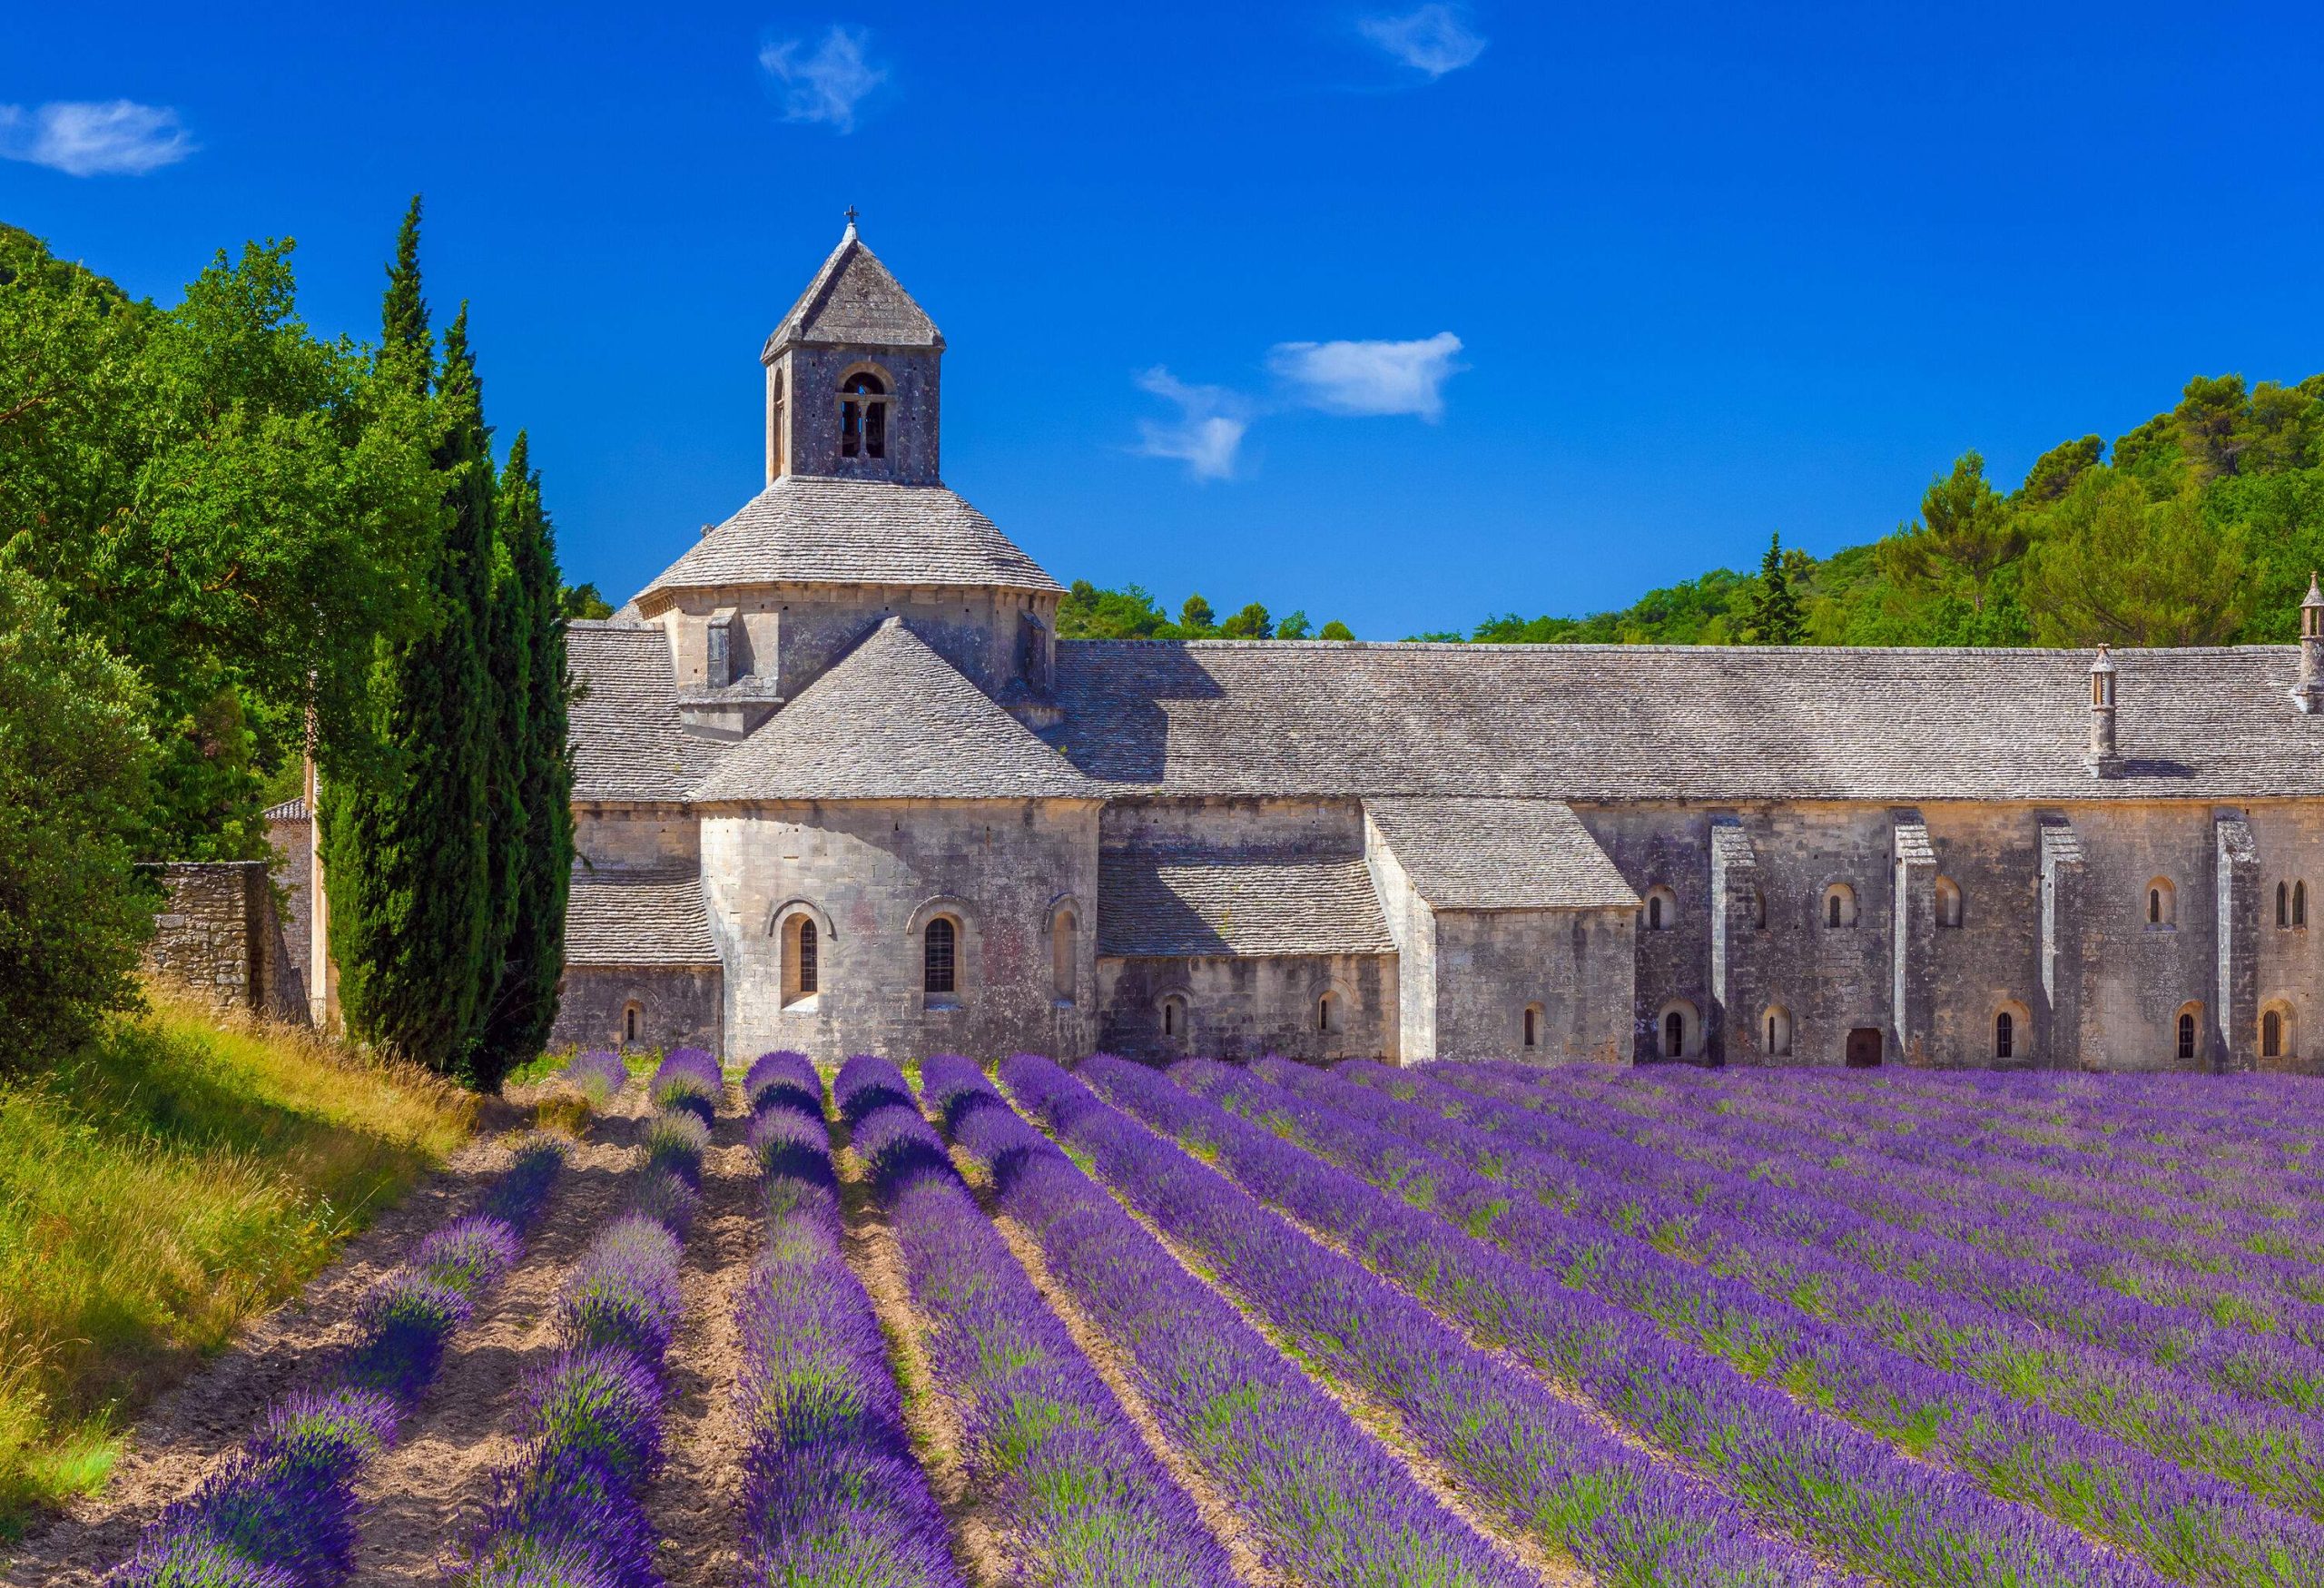 Field of lavender by the side of a long, historic abbey made of stone and surrounded by woods.